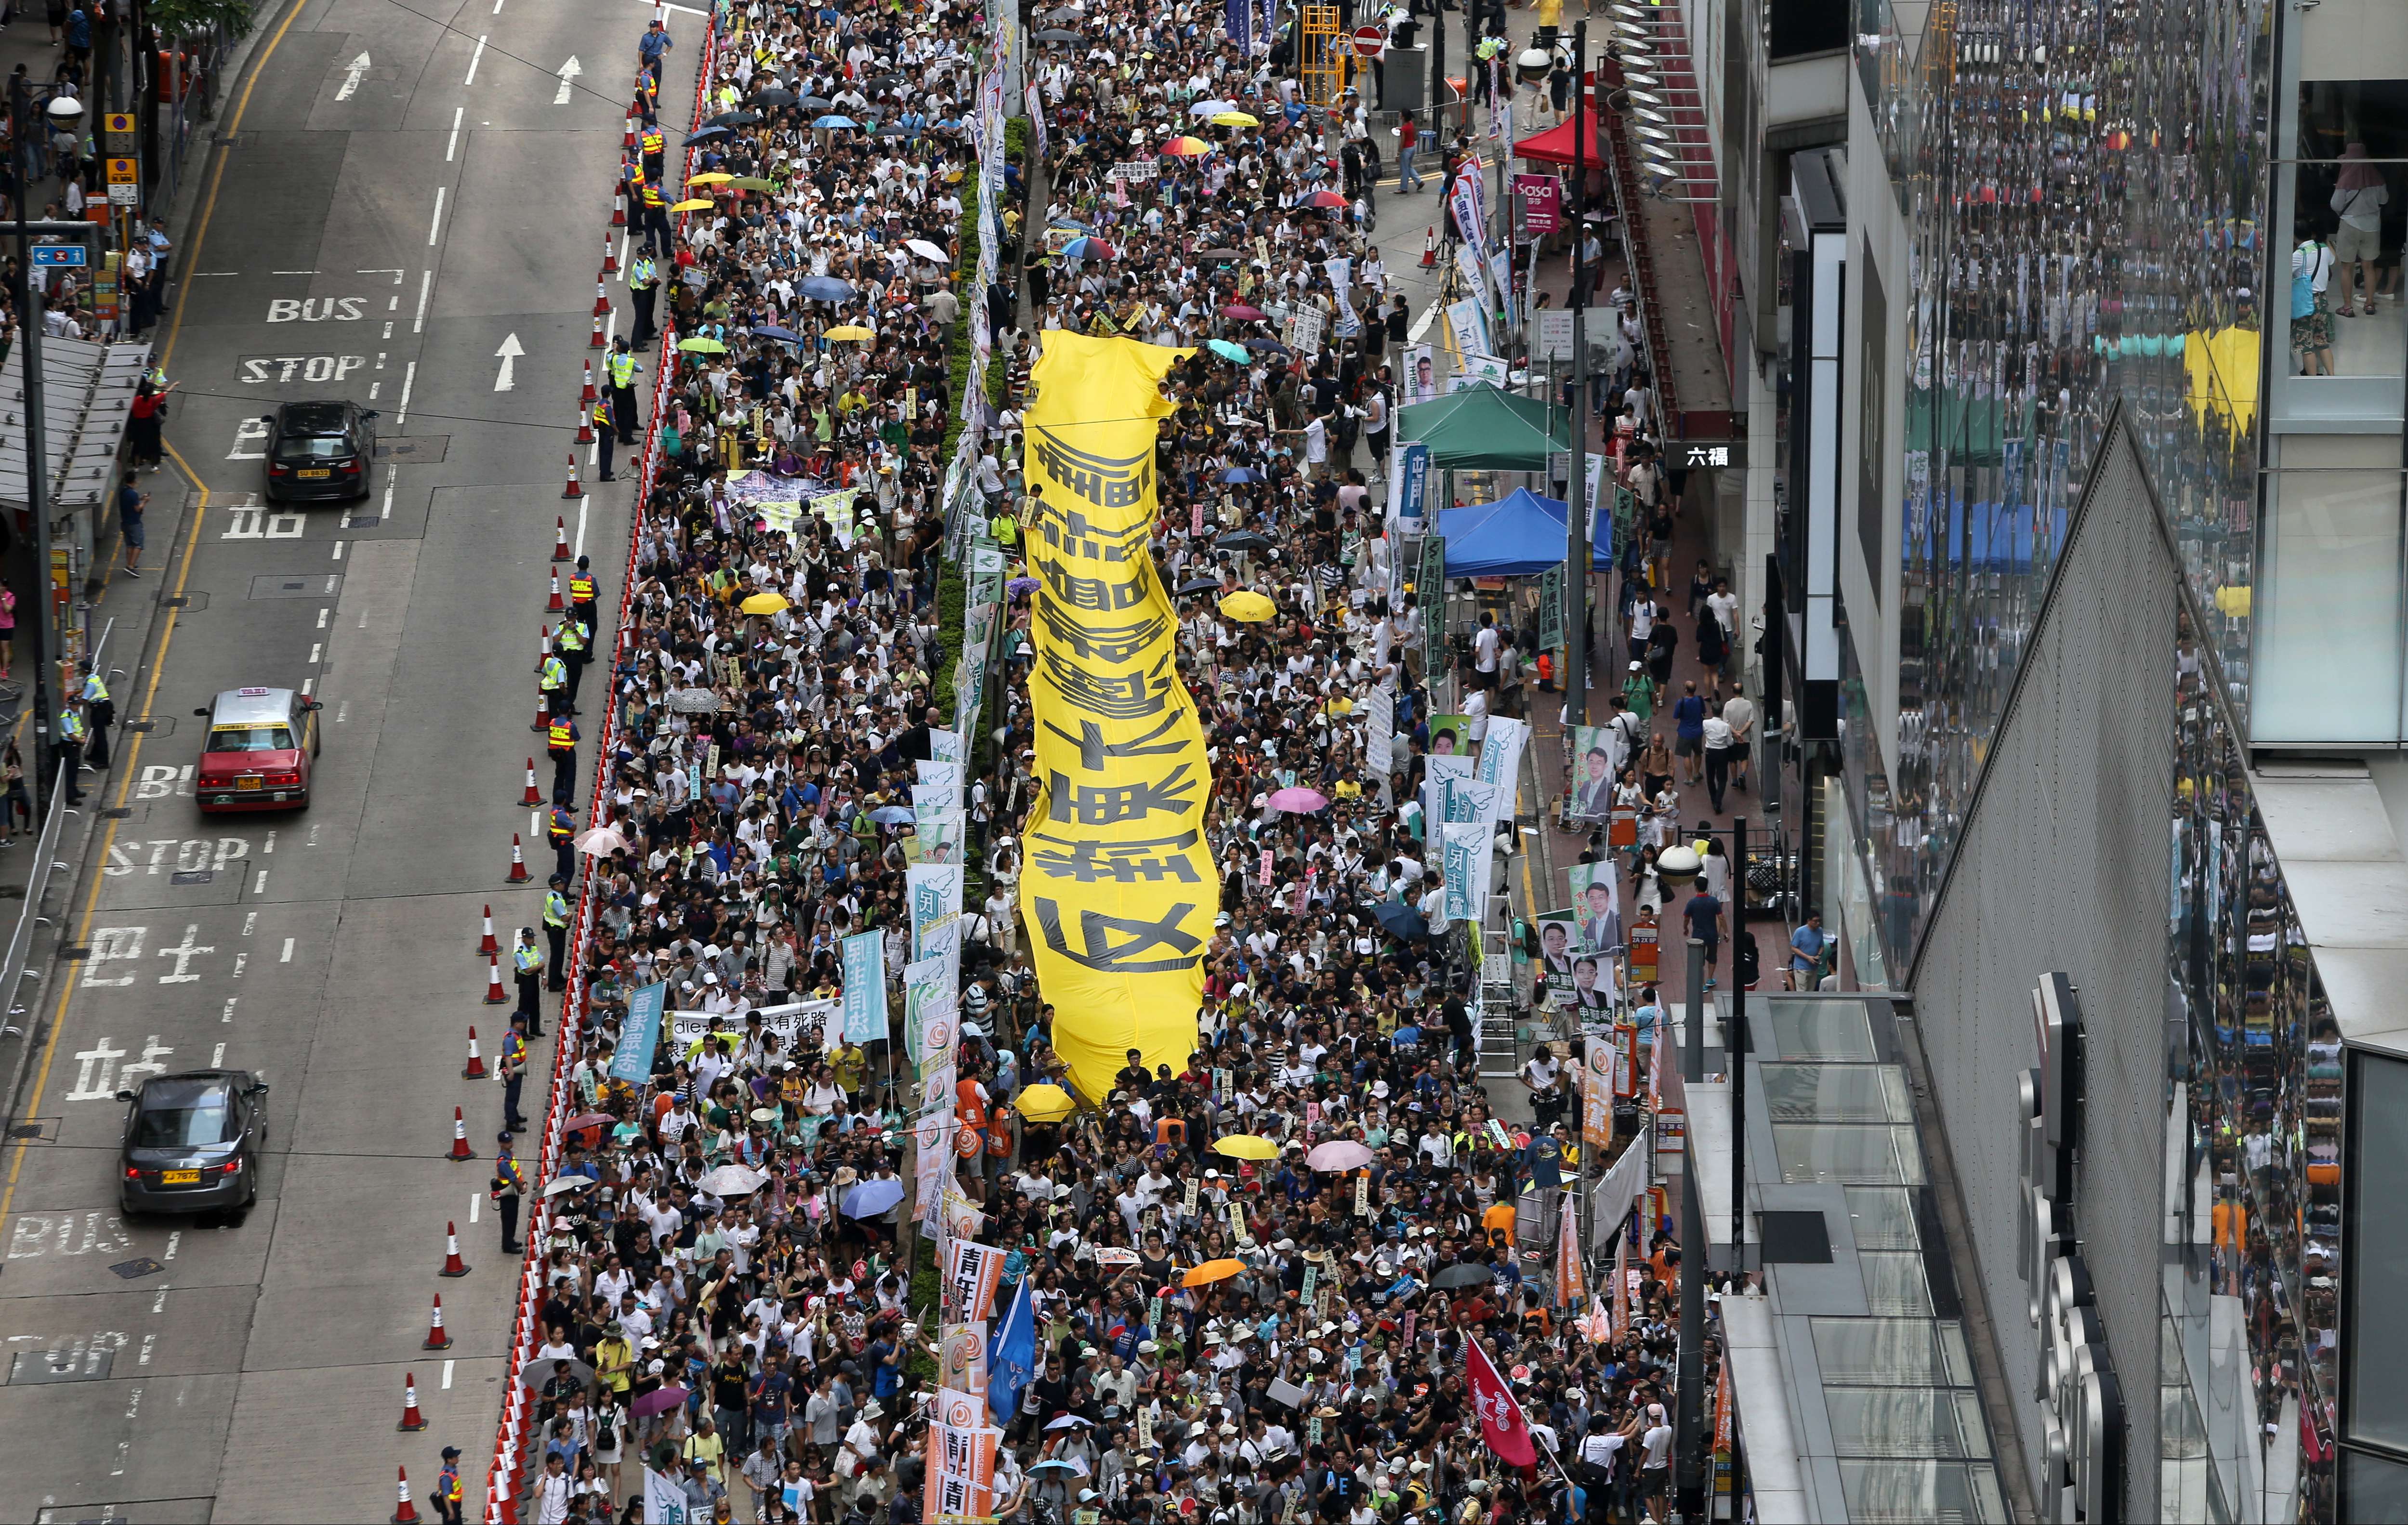 The route of the march passed through Causeway Bay and Wan Chai before ending in Admiralty. Photo: Sam Tsang